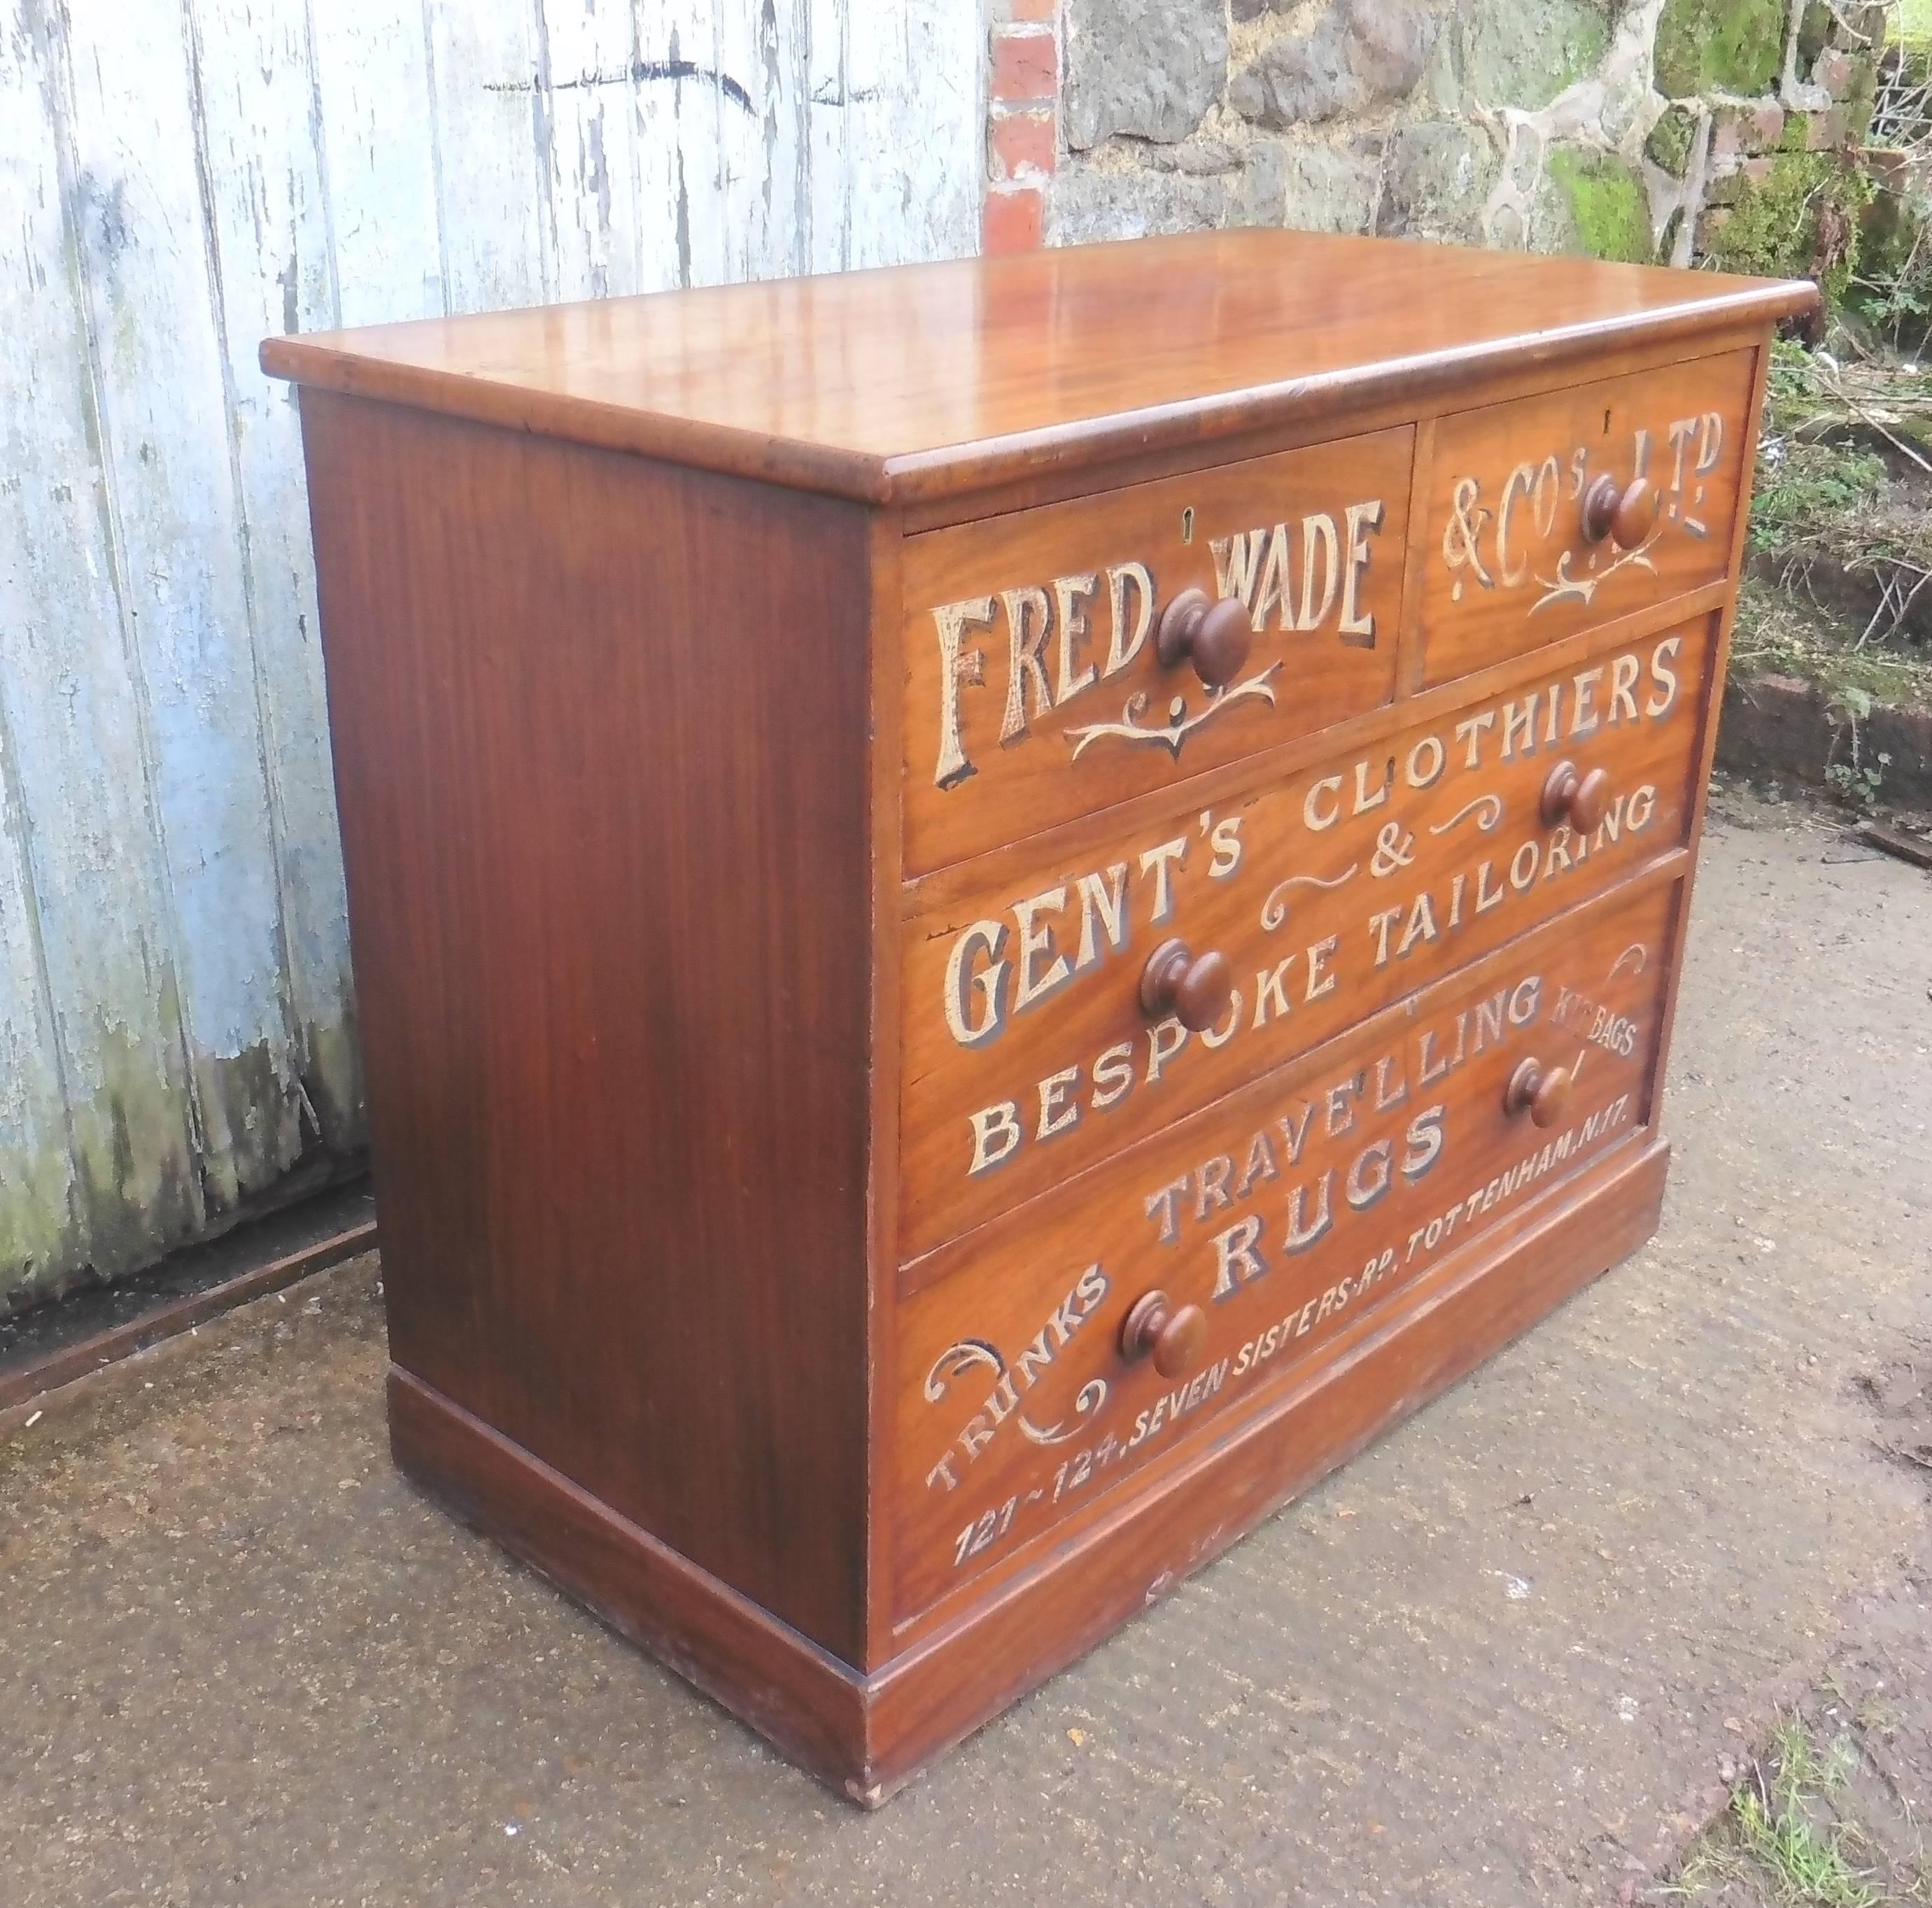 Cold-Painted Victorian Mahogany Sign Painted Chest of Drawers Fred Wade Gentleman’s Outfitter